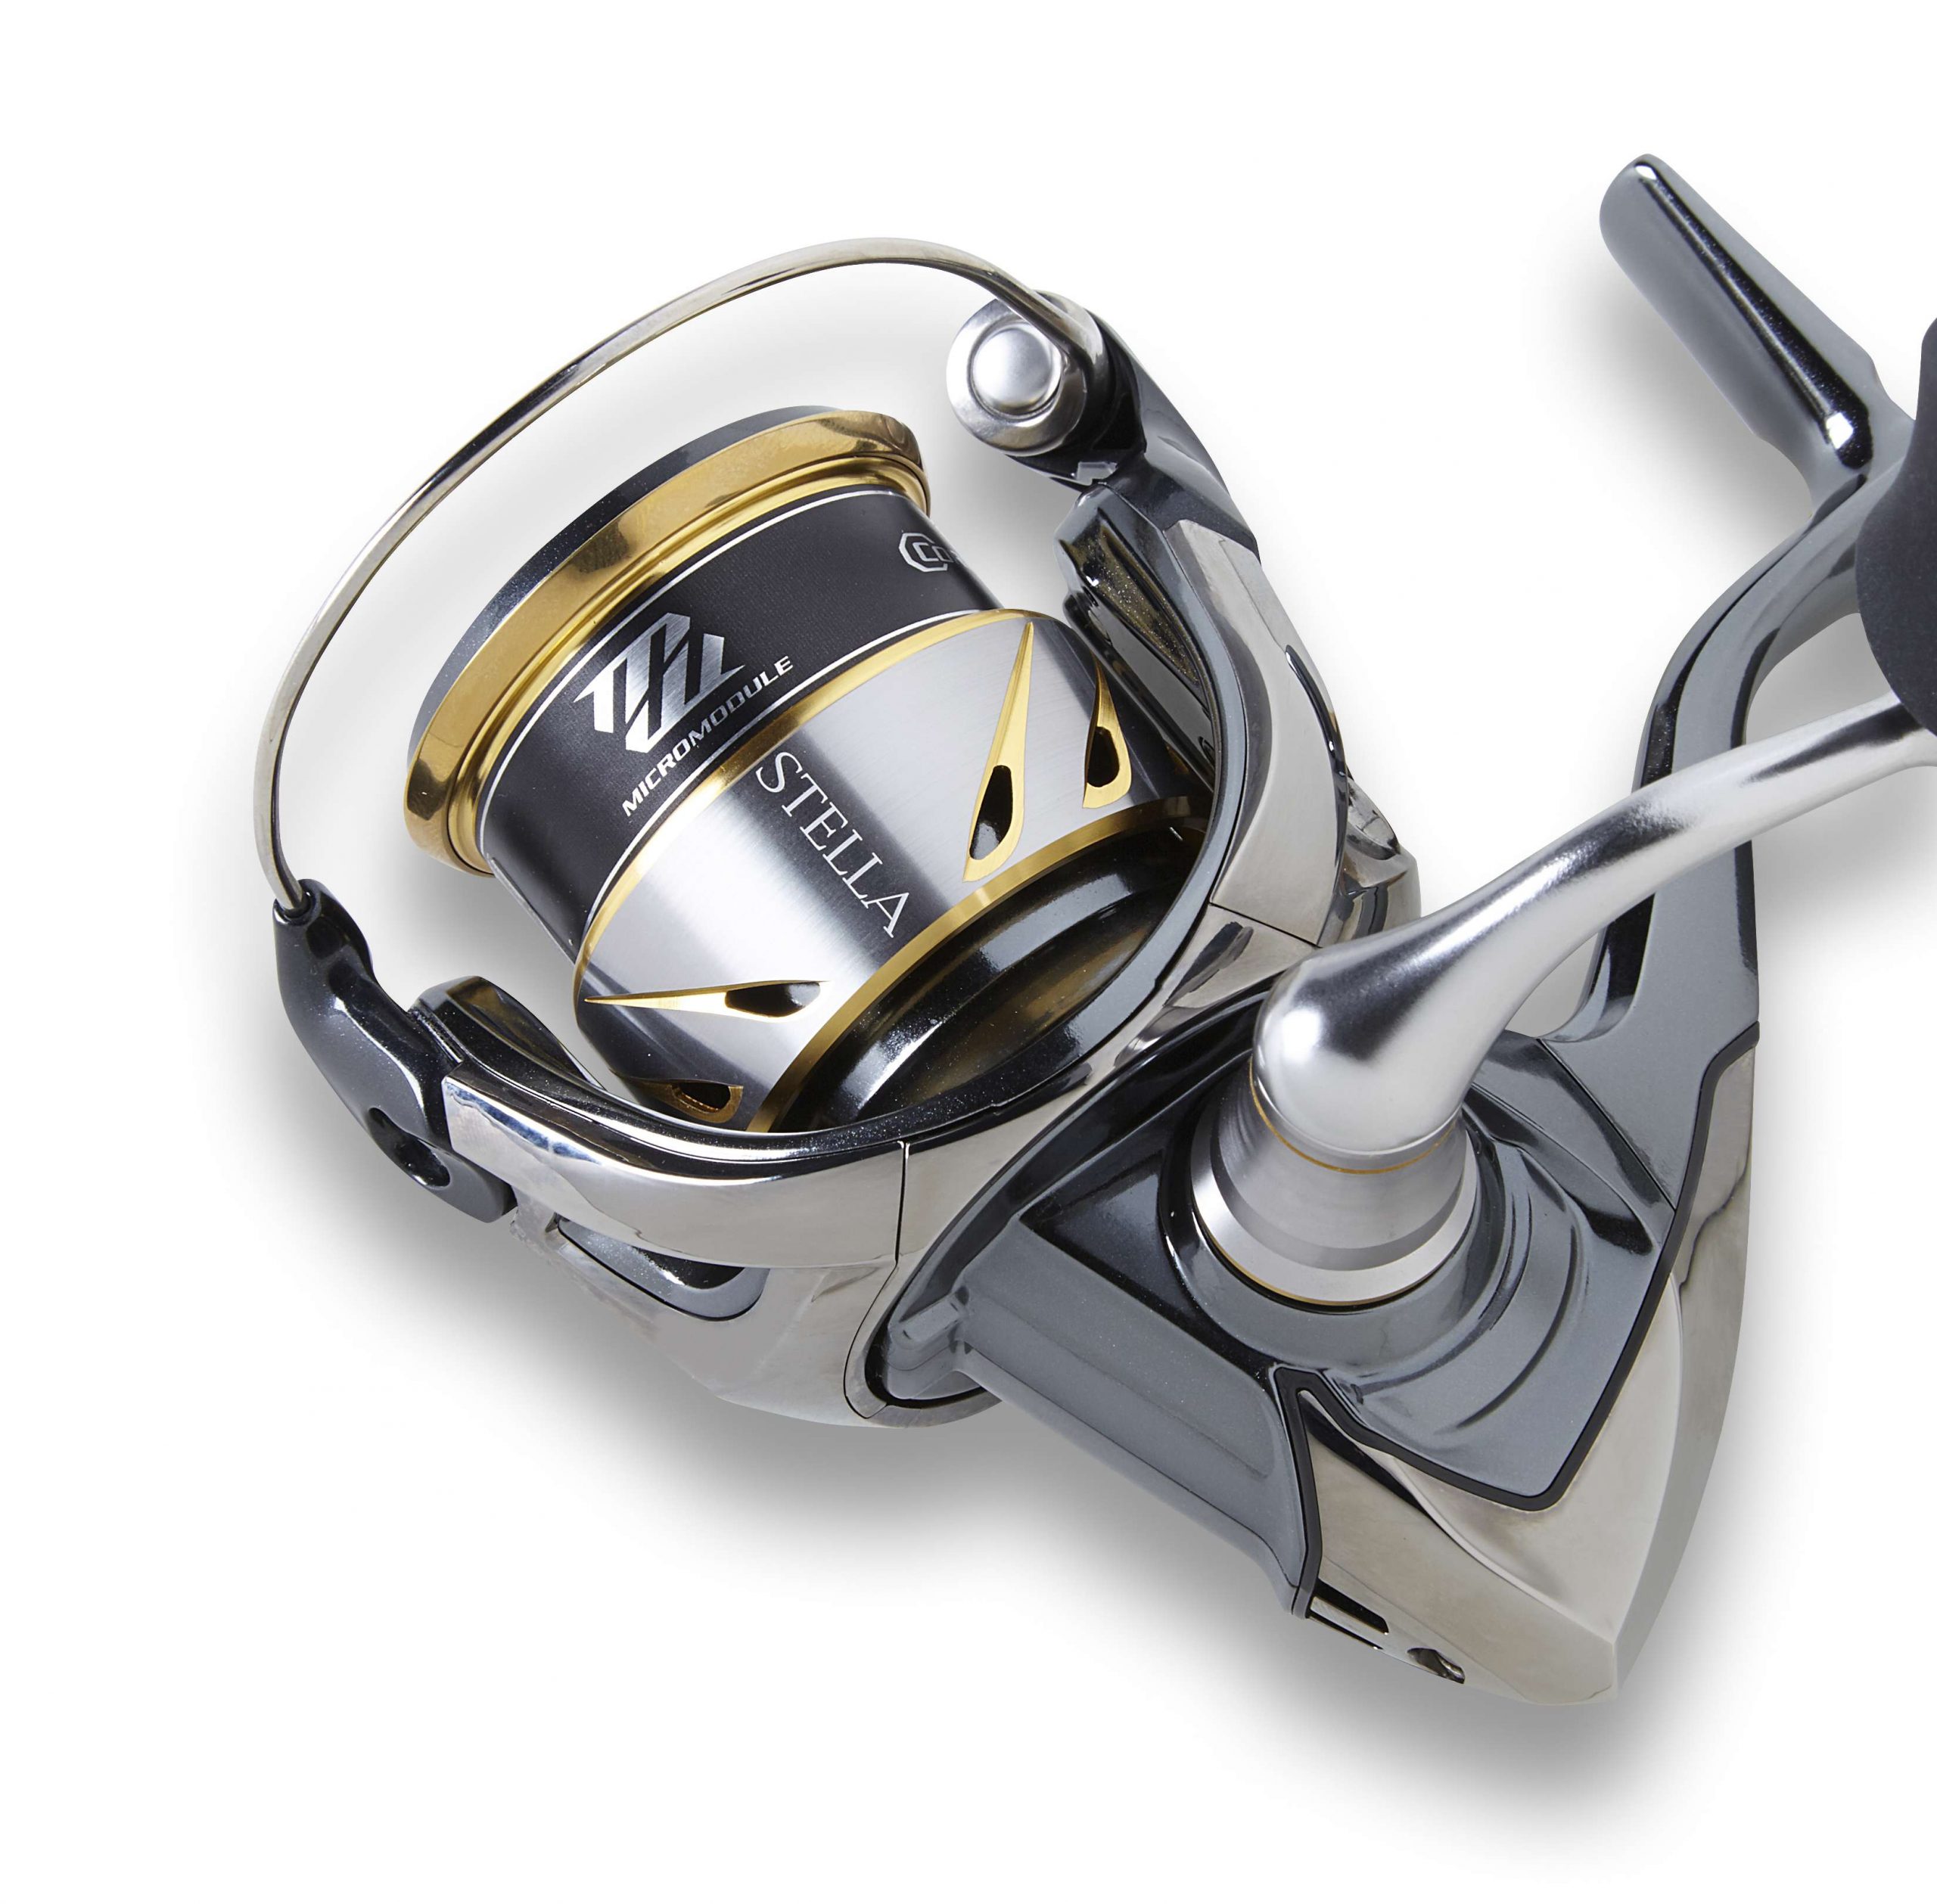 Shimano's newest version of the Stella - this one dubbed the FI - would complement Jackall's new sticks very nicely. It's the finest spinning reel Shimano makes, and it sports several upgrades from the original Stella.